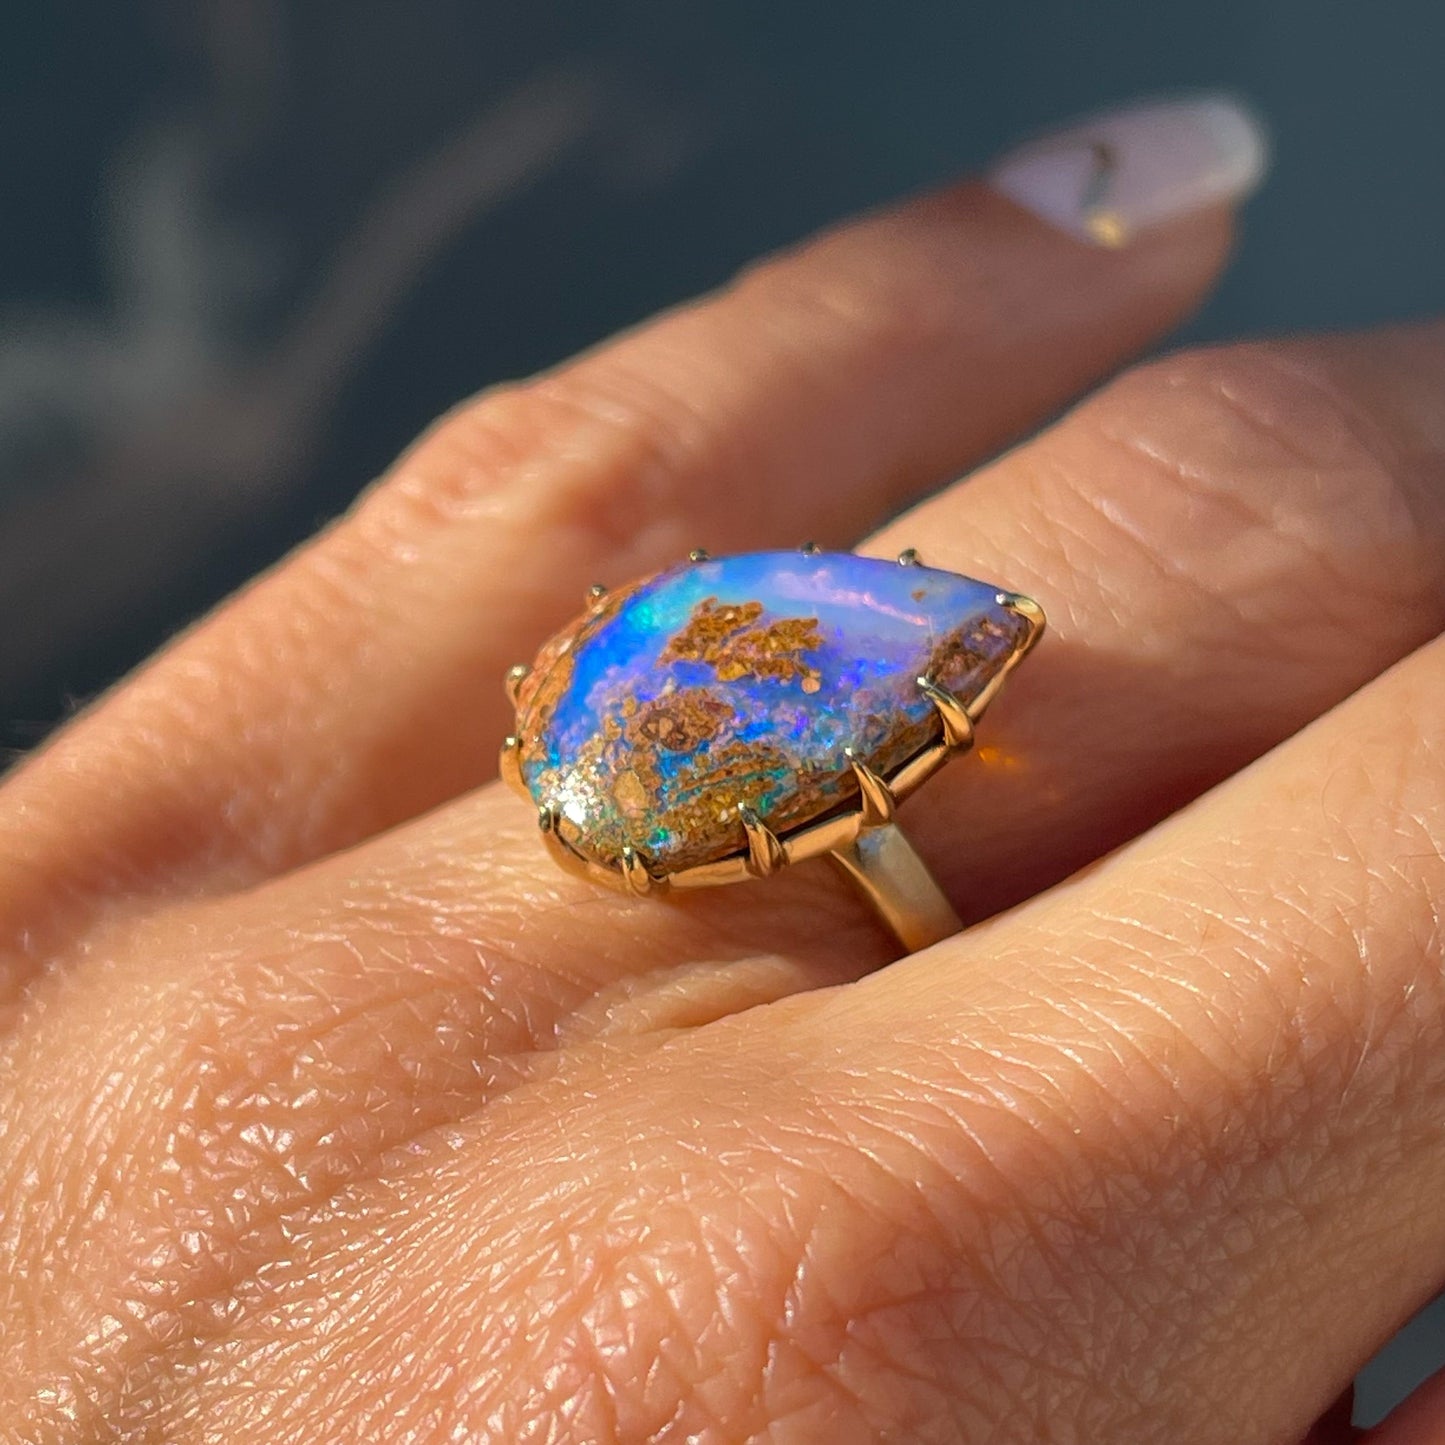 A NIXIN Jewelry Australian Opal Ring modeled on a hand and shot at a slight angle displaying the band and claw prong setting.